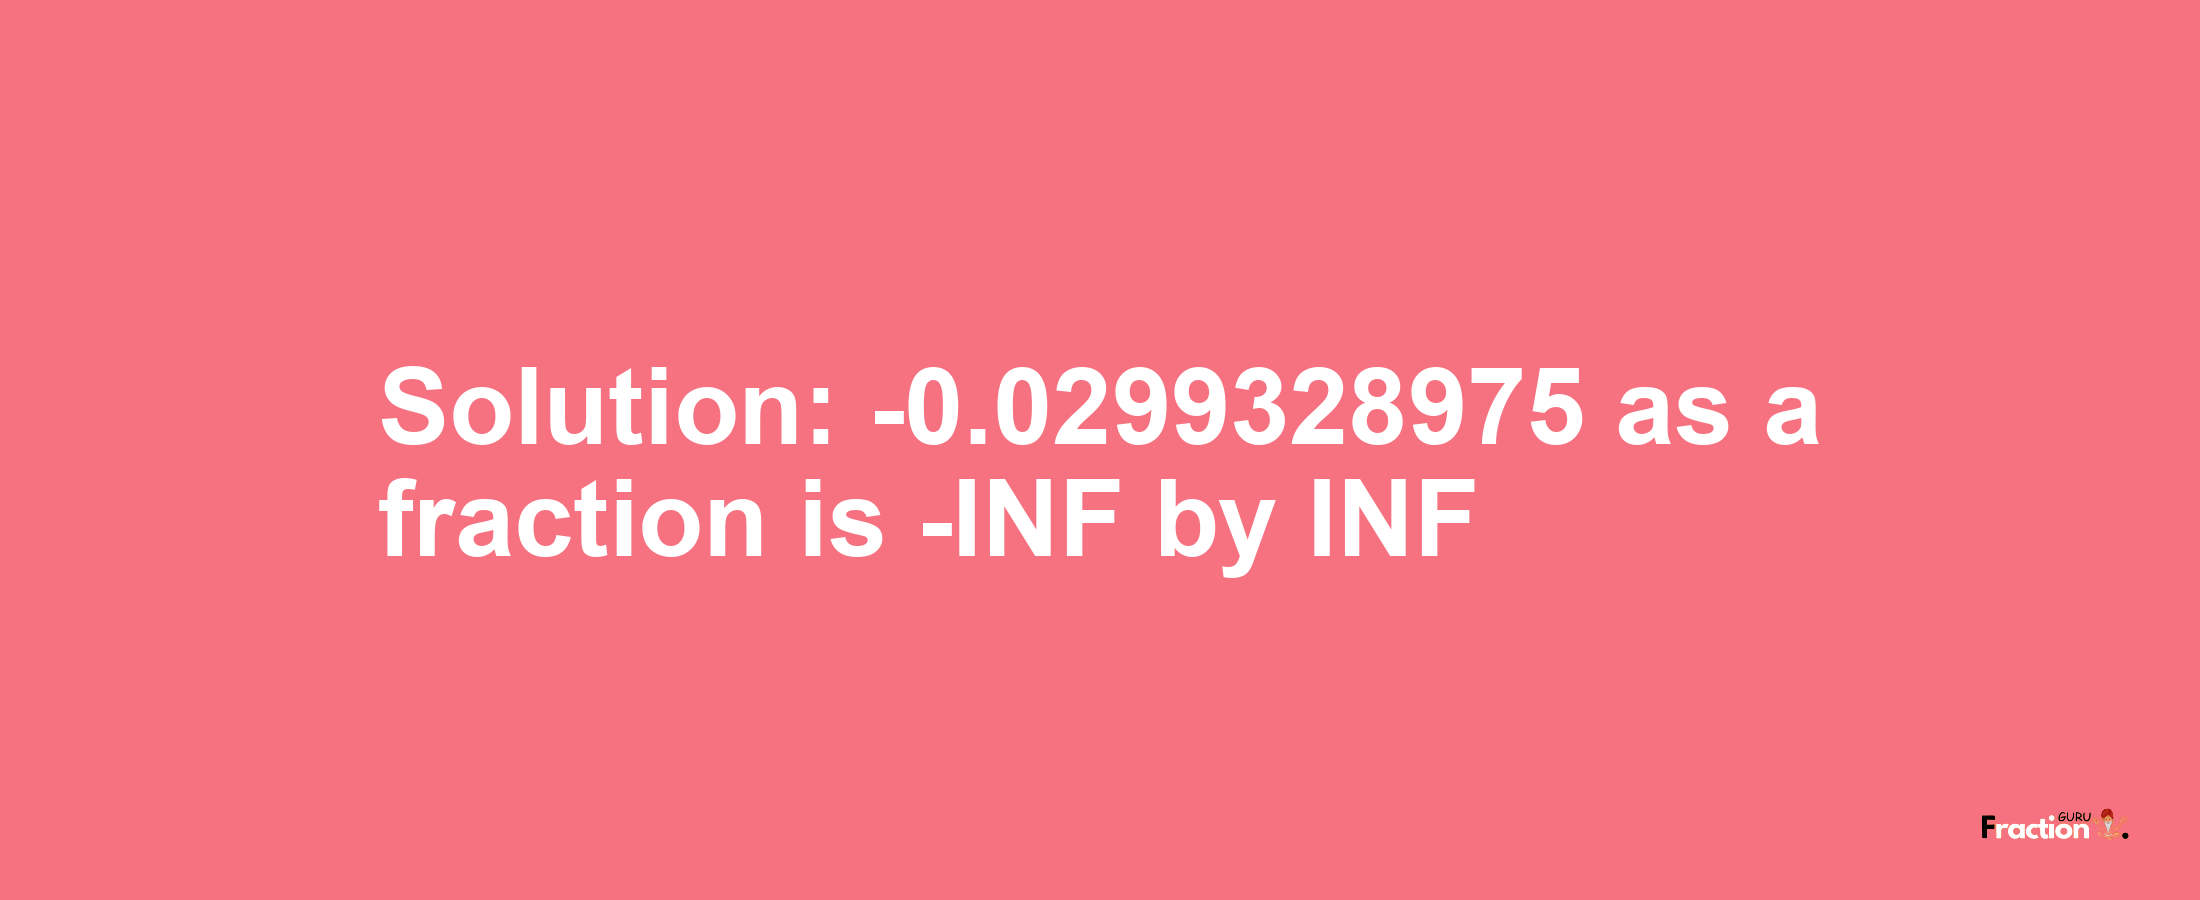 Solution:-0.0299328975 as a fraction is -INF/INF